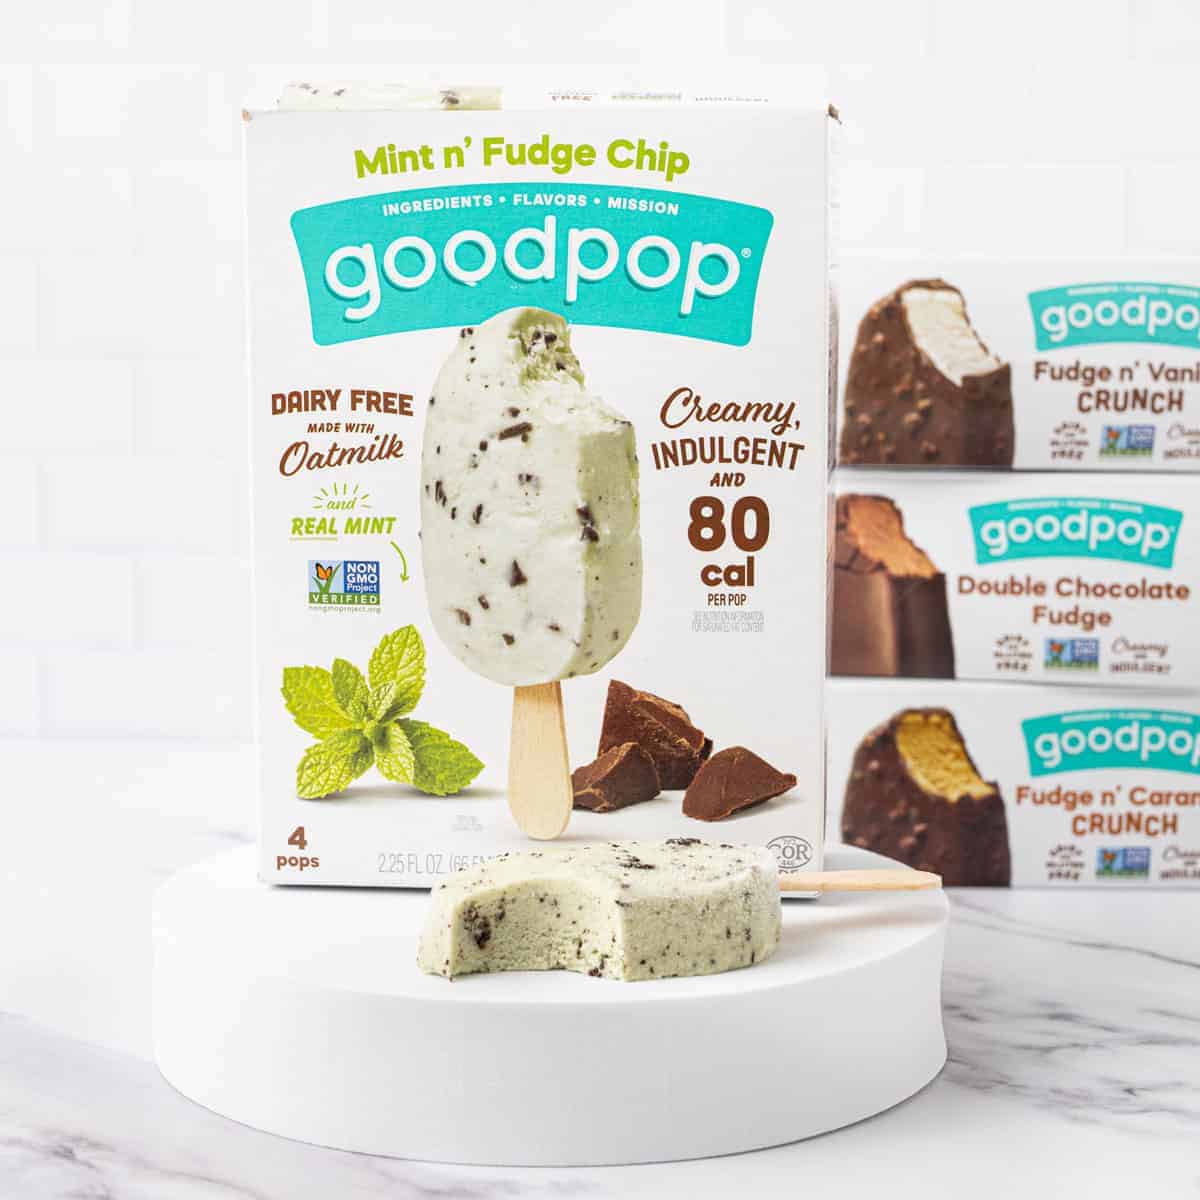 A box of GoodPop's Mint n' Fudge Chip dipped bars with a popsicle in front of it with a bite taken out.